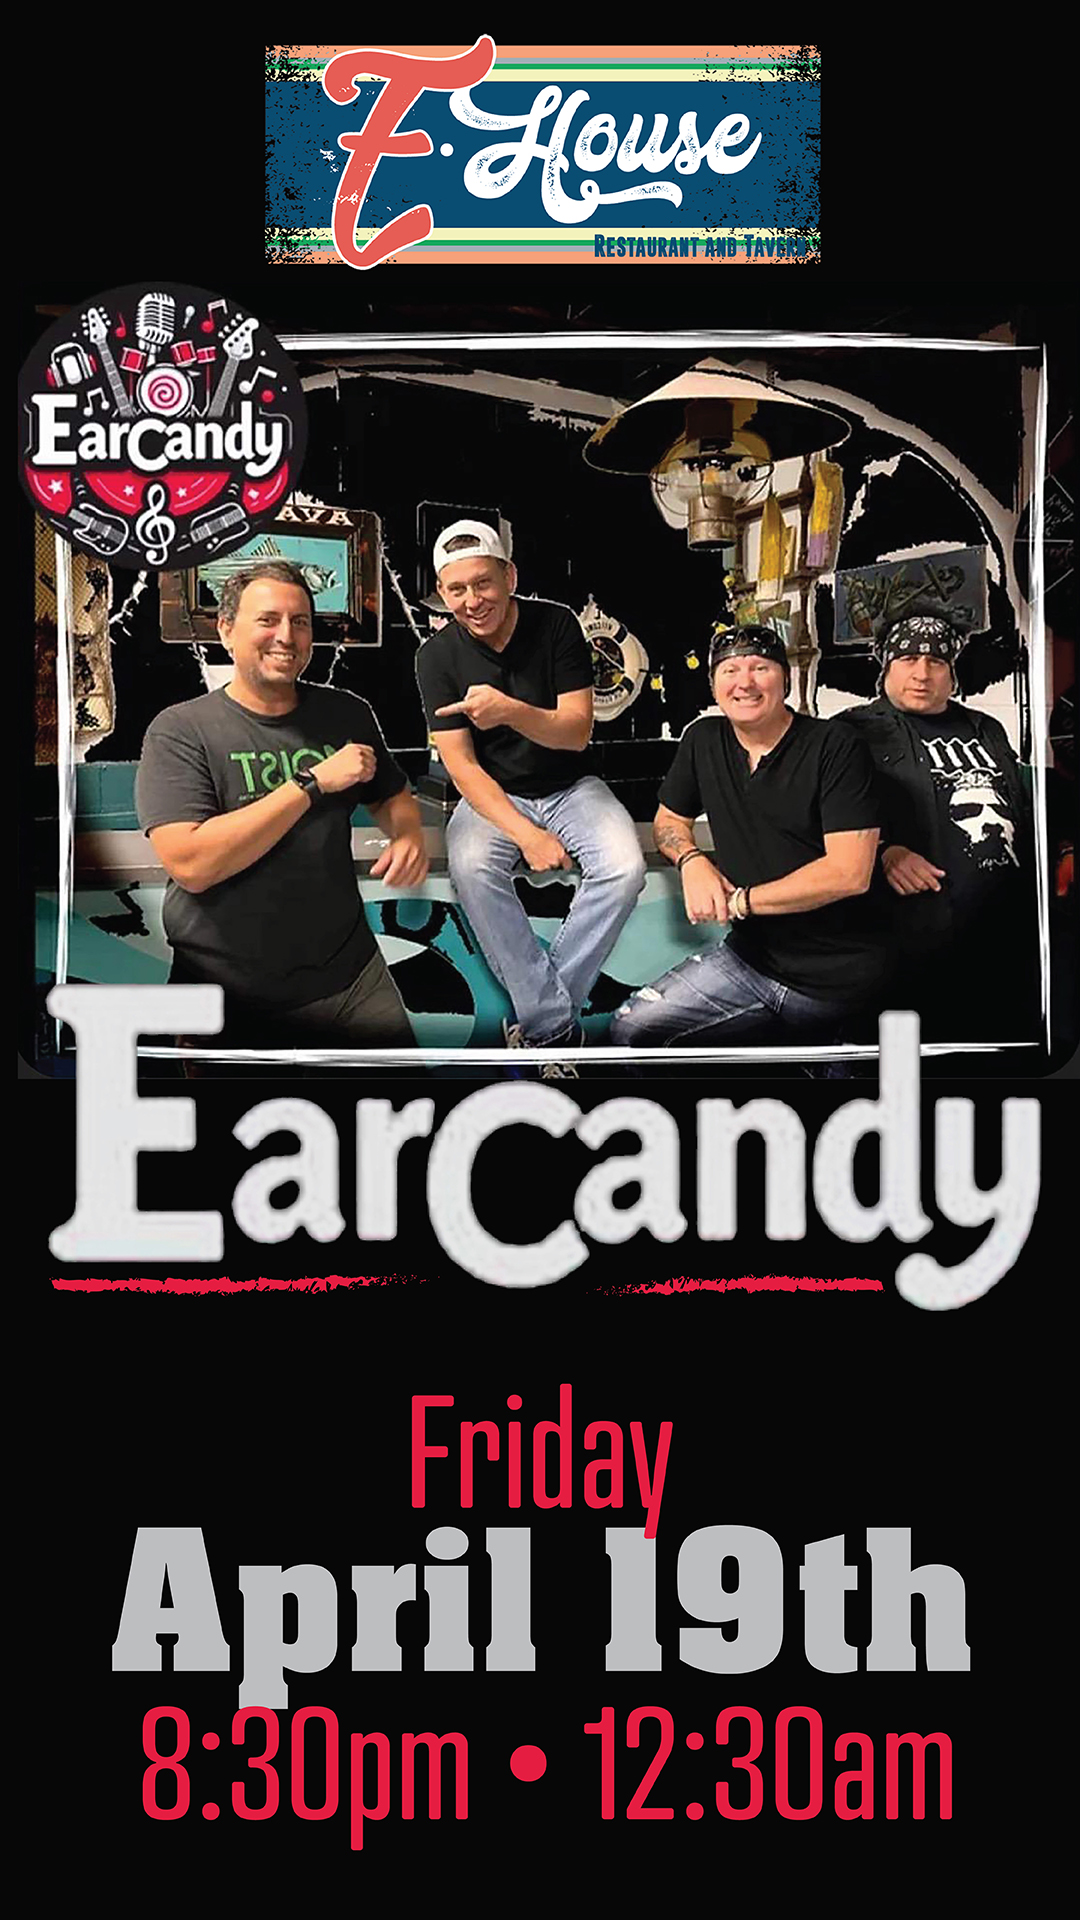 Promotional flyer for the band "earcandy" playing at "e. house" on friday, april 19th from 8:30pm to 12:30am.